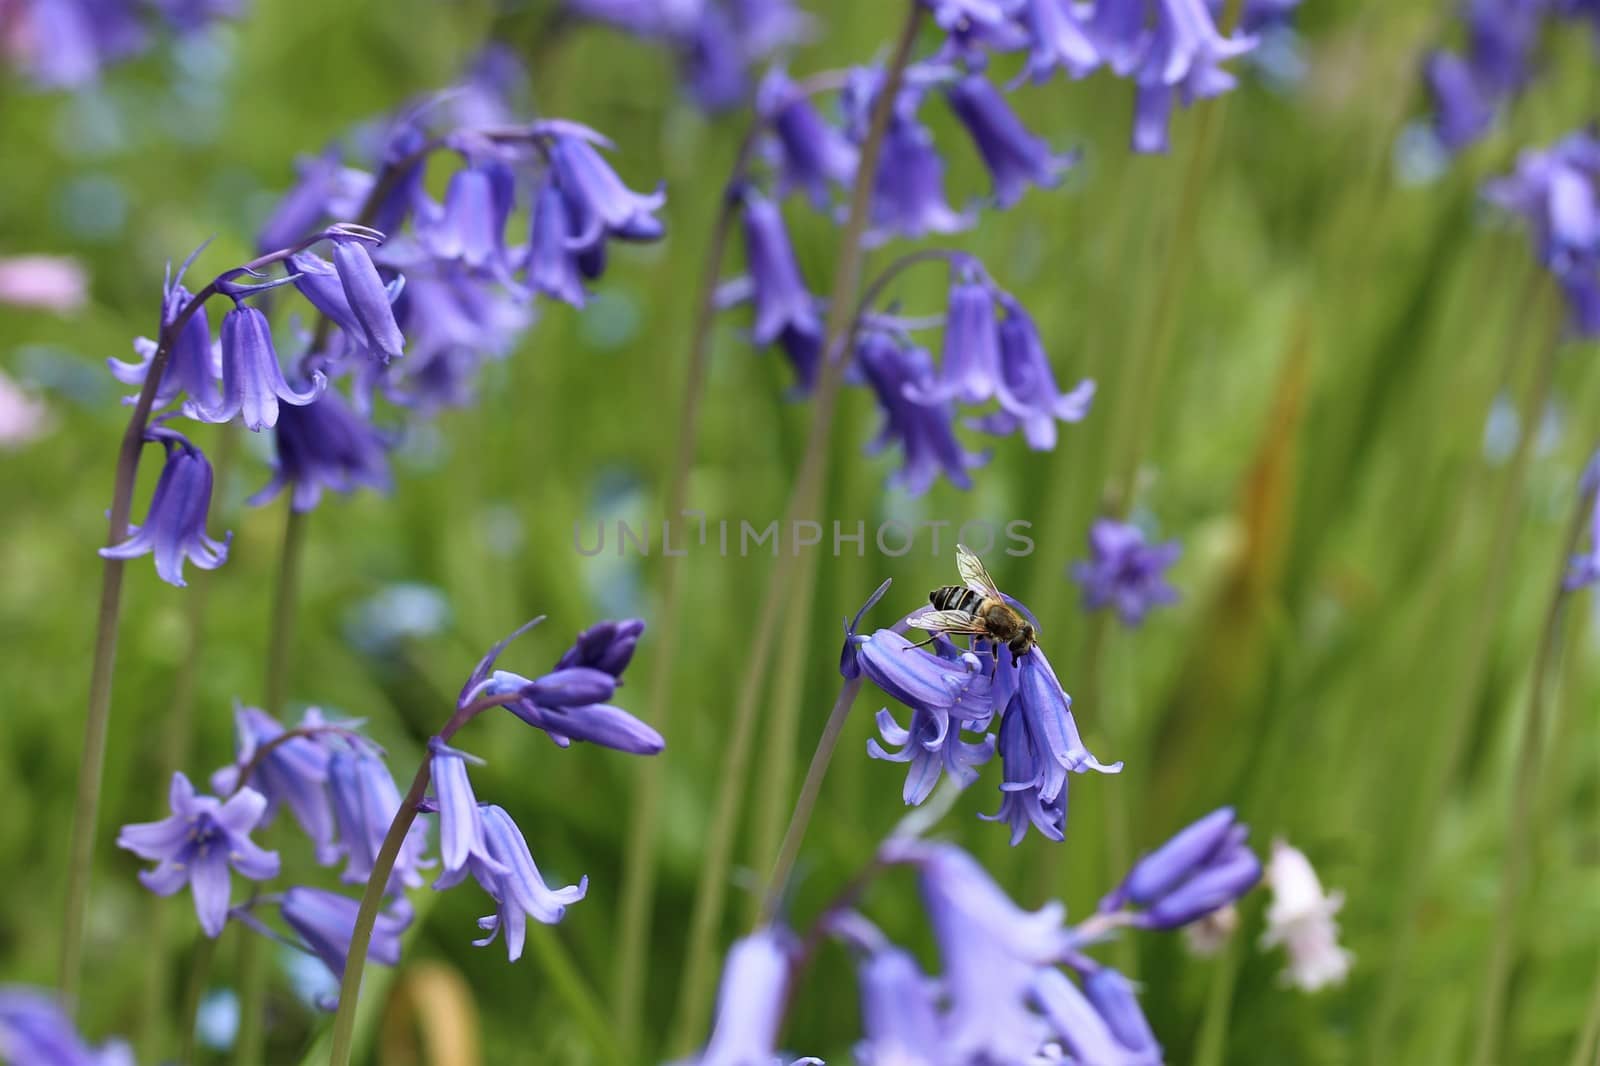 A close-up of some Hyacinthoides hispanica in blossom